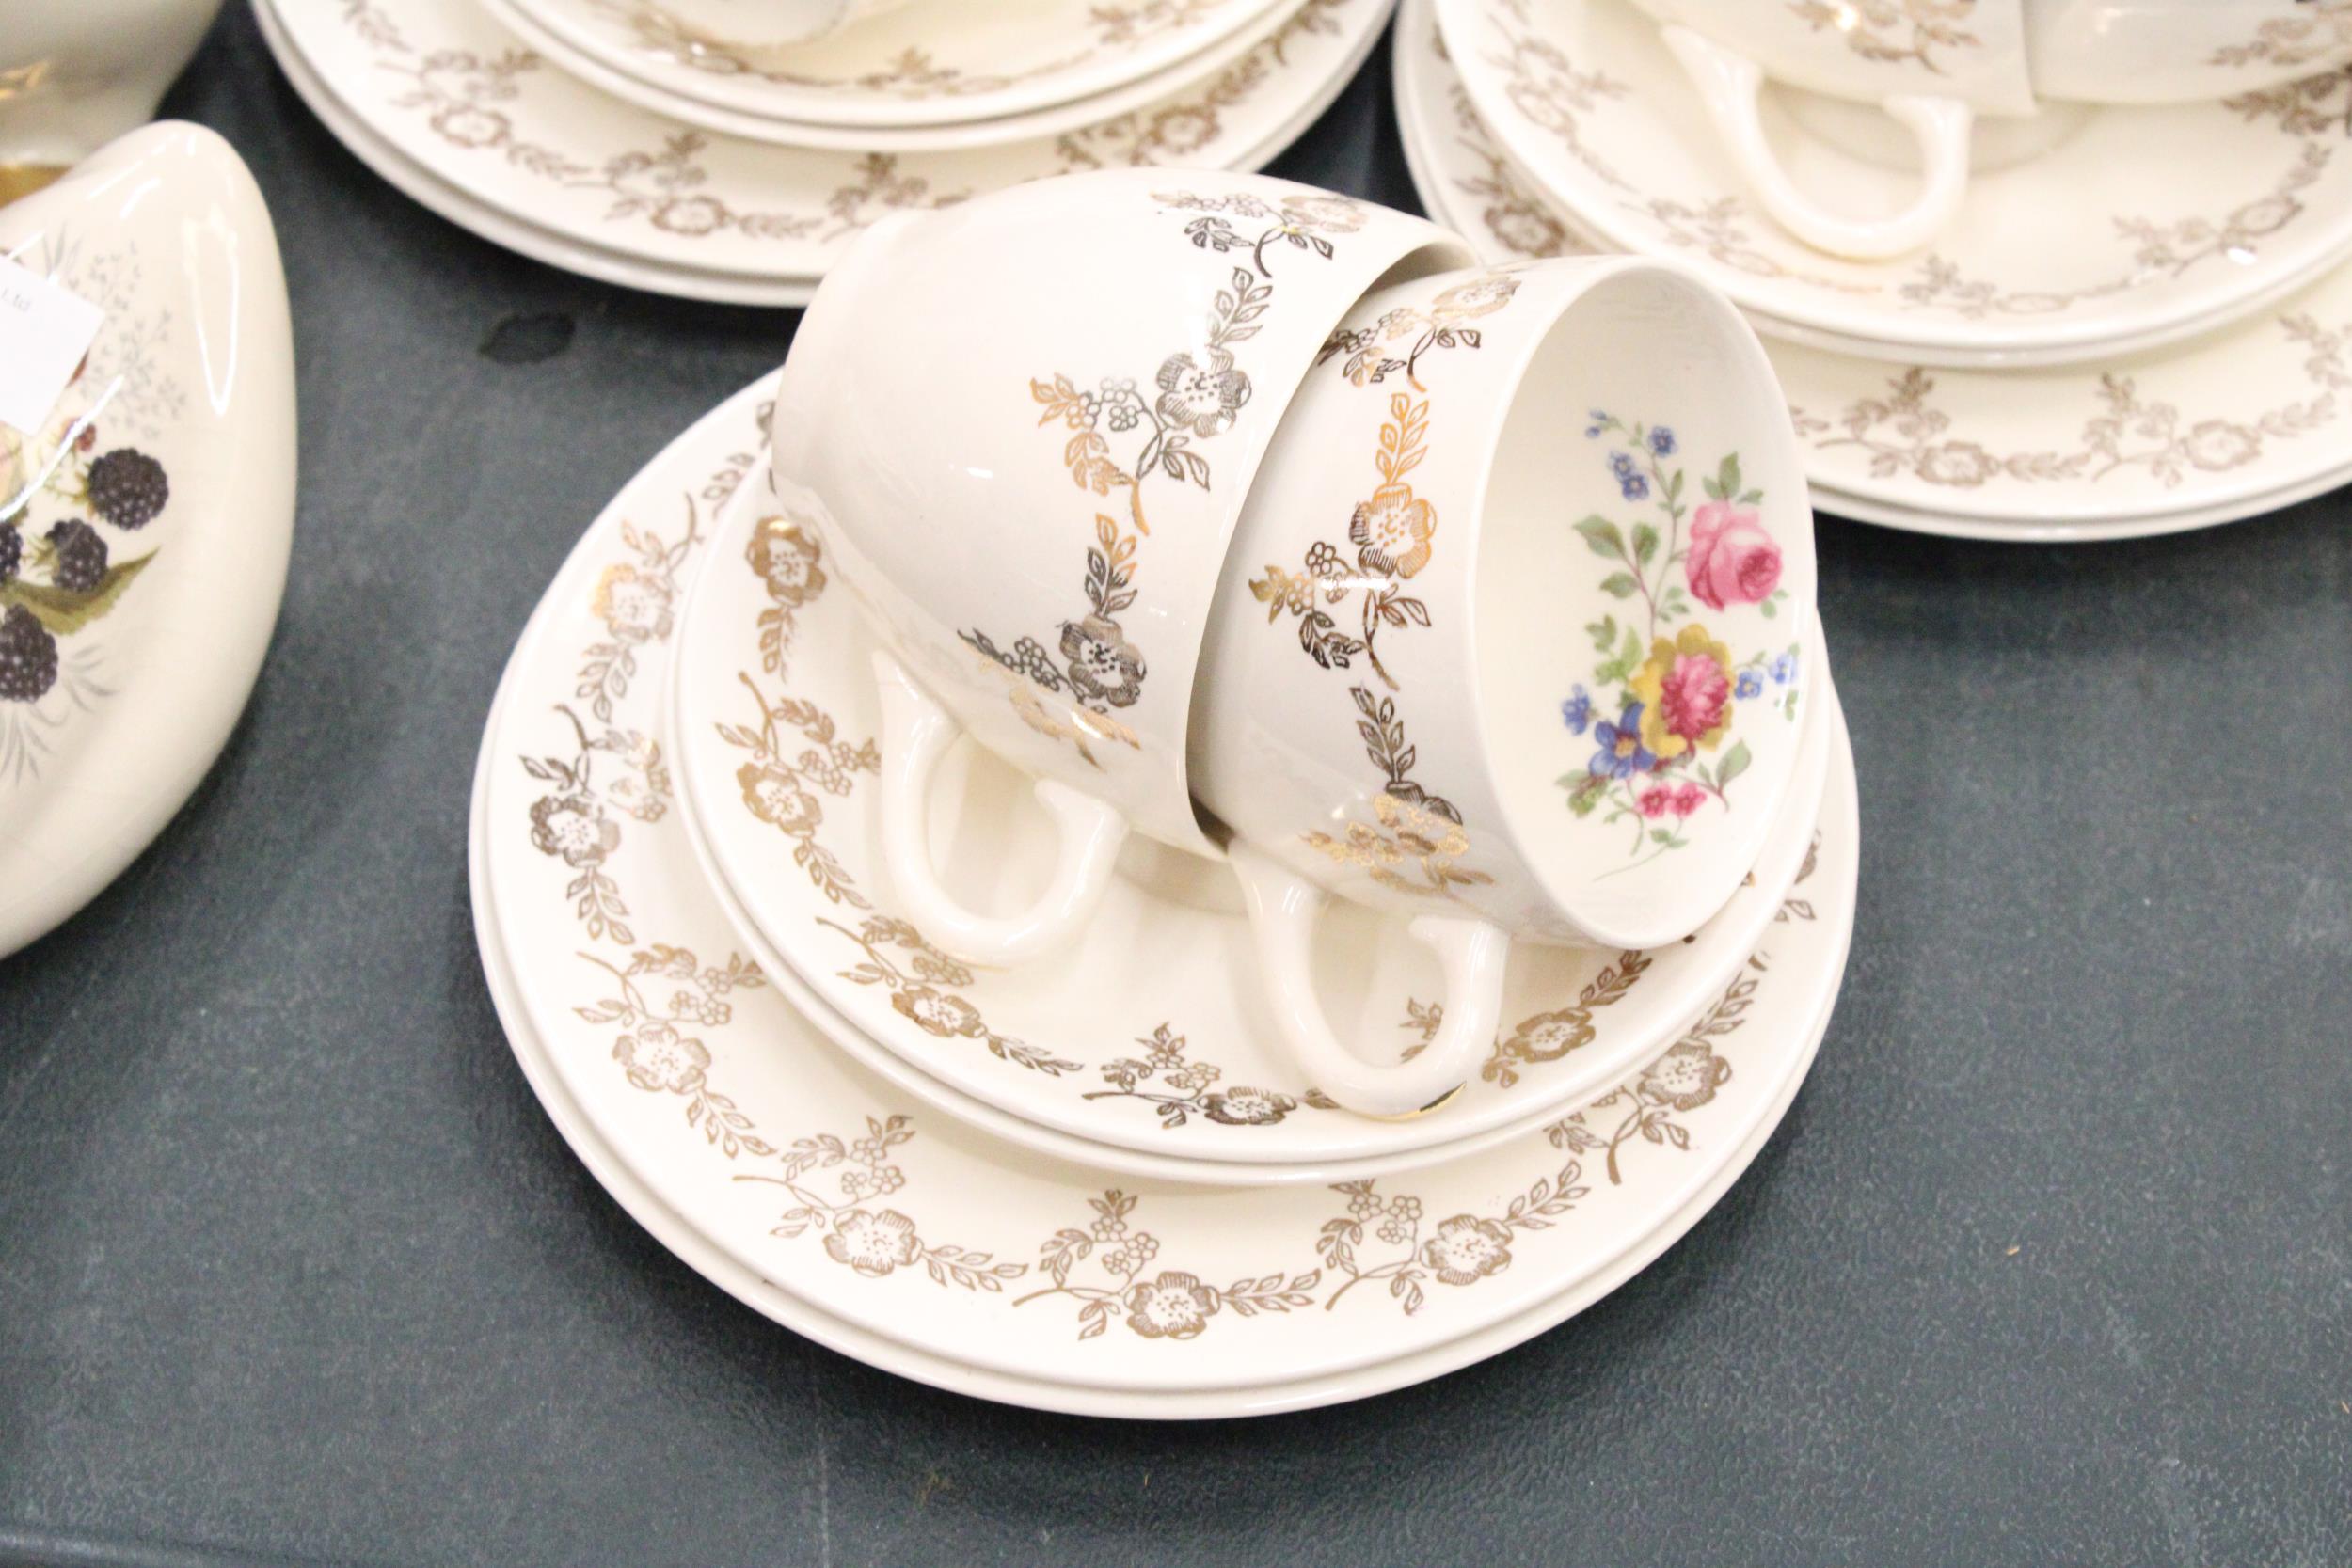 A QUANTITY OF VINTAGE TEAWARE TO INCLUDE, EMPIRE, CAKE PLATE, SUGAR BOWL, CREAM JUG, CUPS, SAUCERS - Image 2 of 5